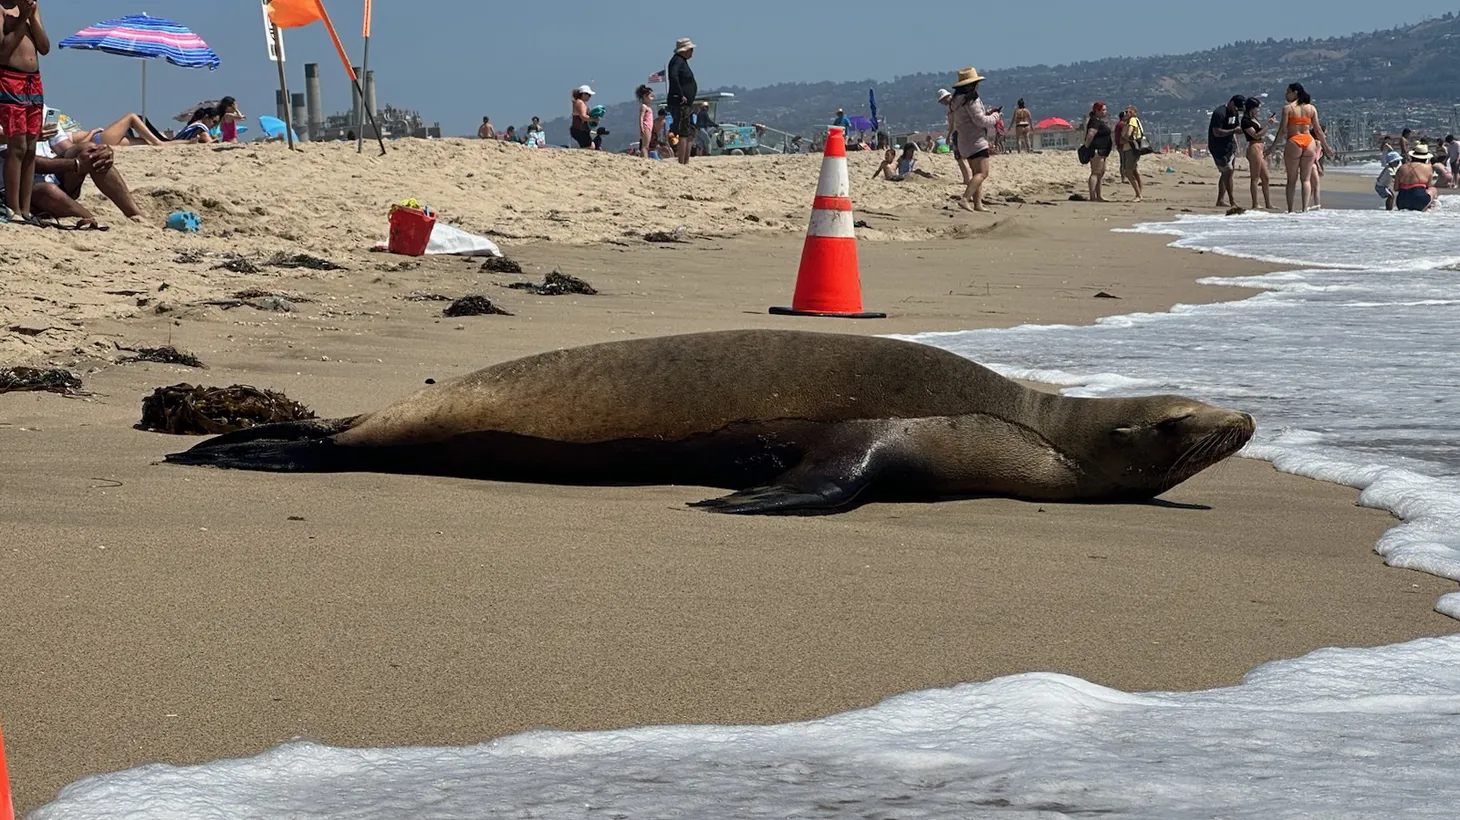 Sea lions have been found washed up on the beach due to toxic algal bloom poisoning.